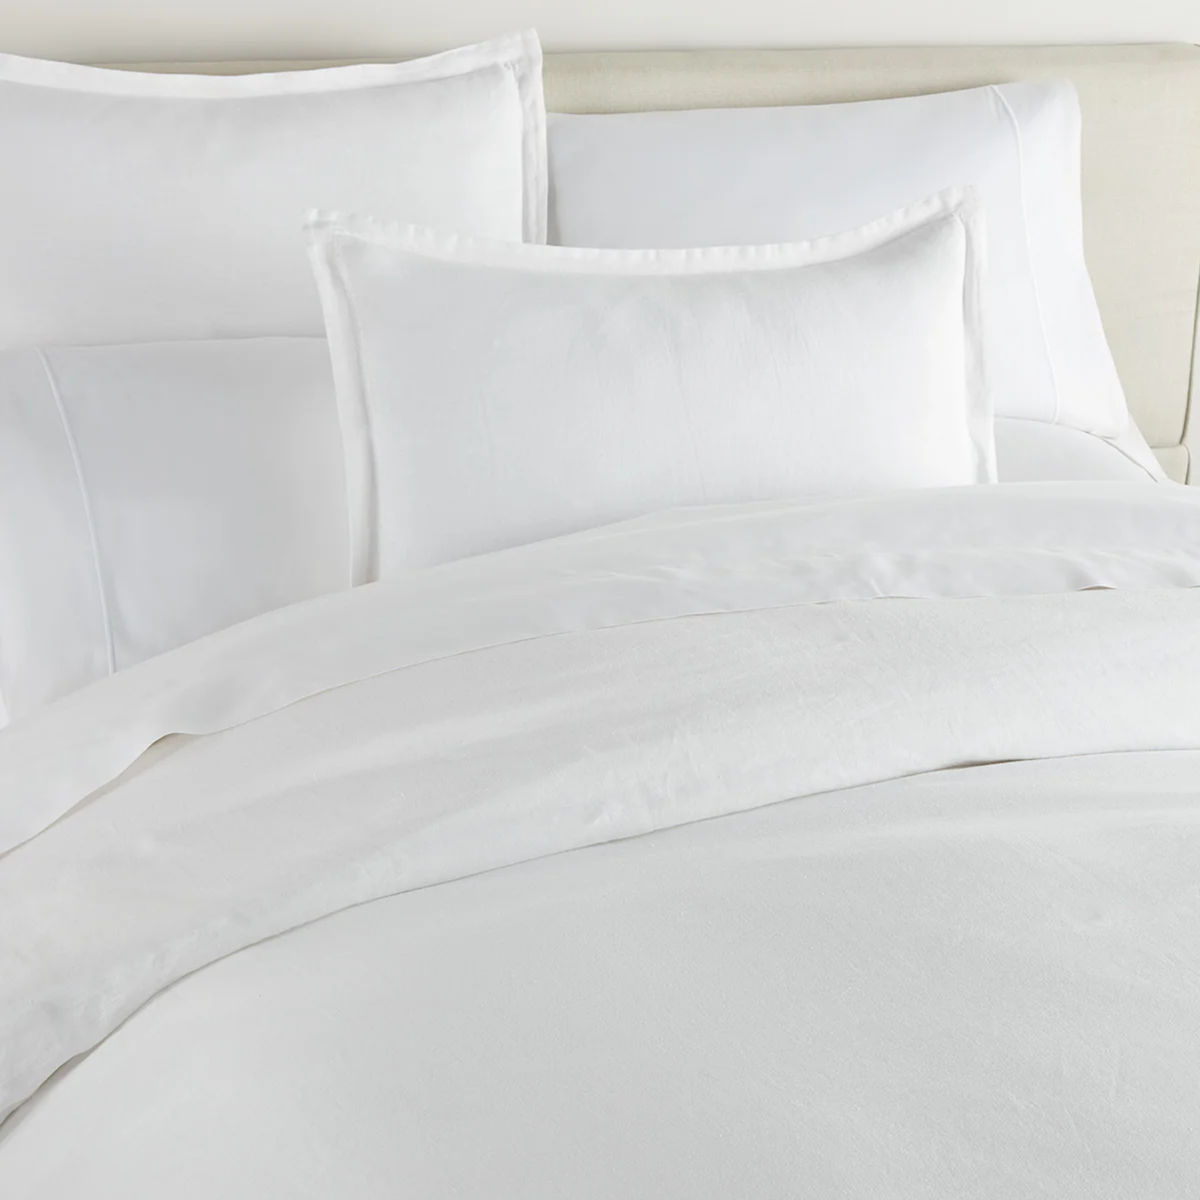 Full Bed Closeup of Peacock Alley European Washed Linen Bedding in White Color